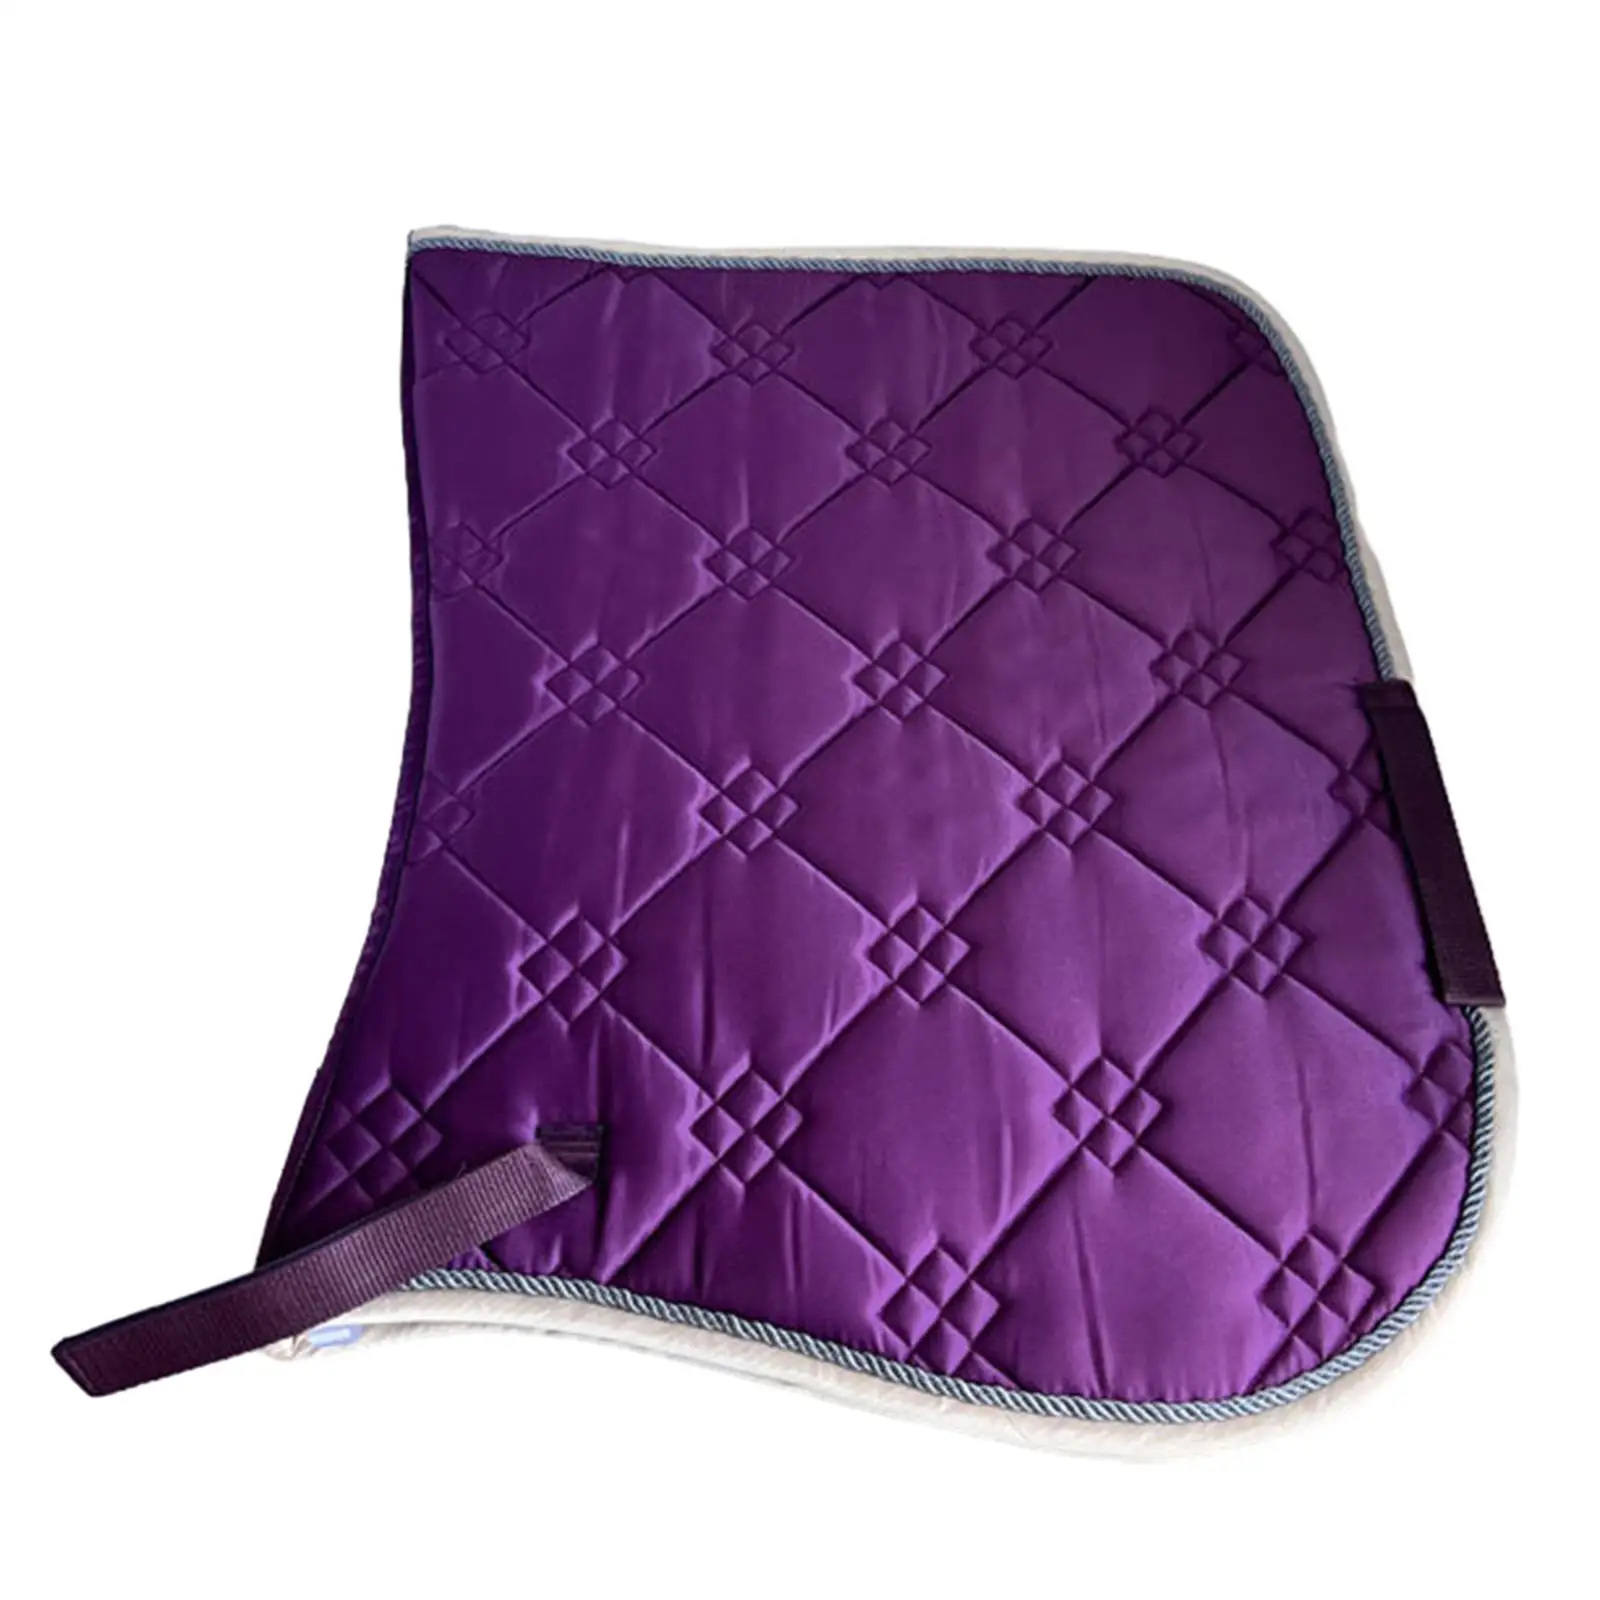 Saddle Pad for Horse Equestrian Riding Equipment Sports Riding Soft Nonslip Protector Portable Breathable Dressage Pad